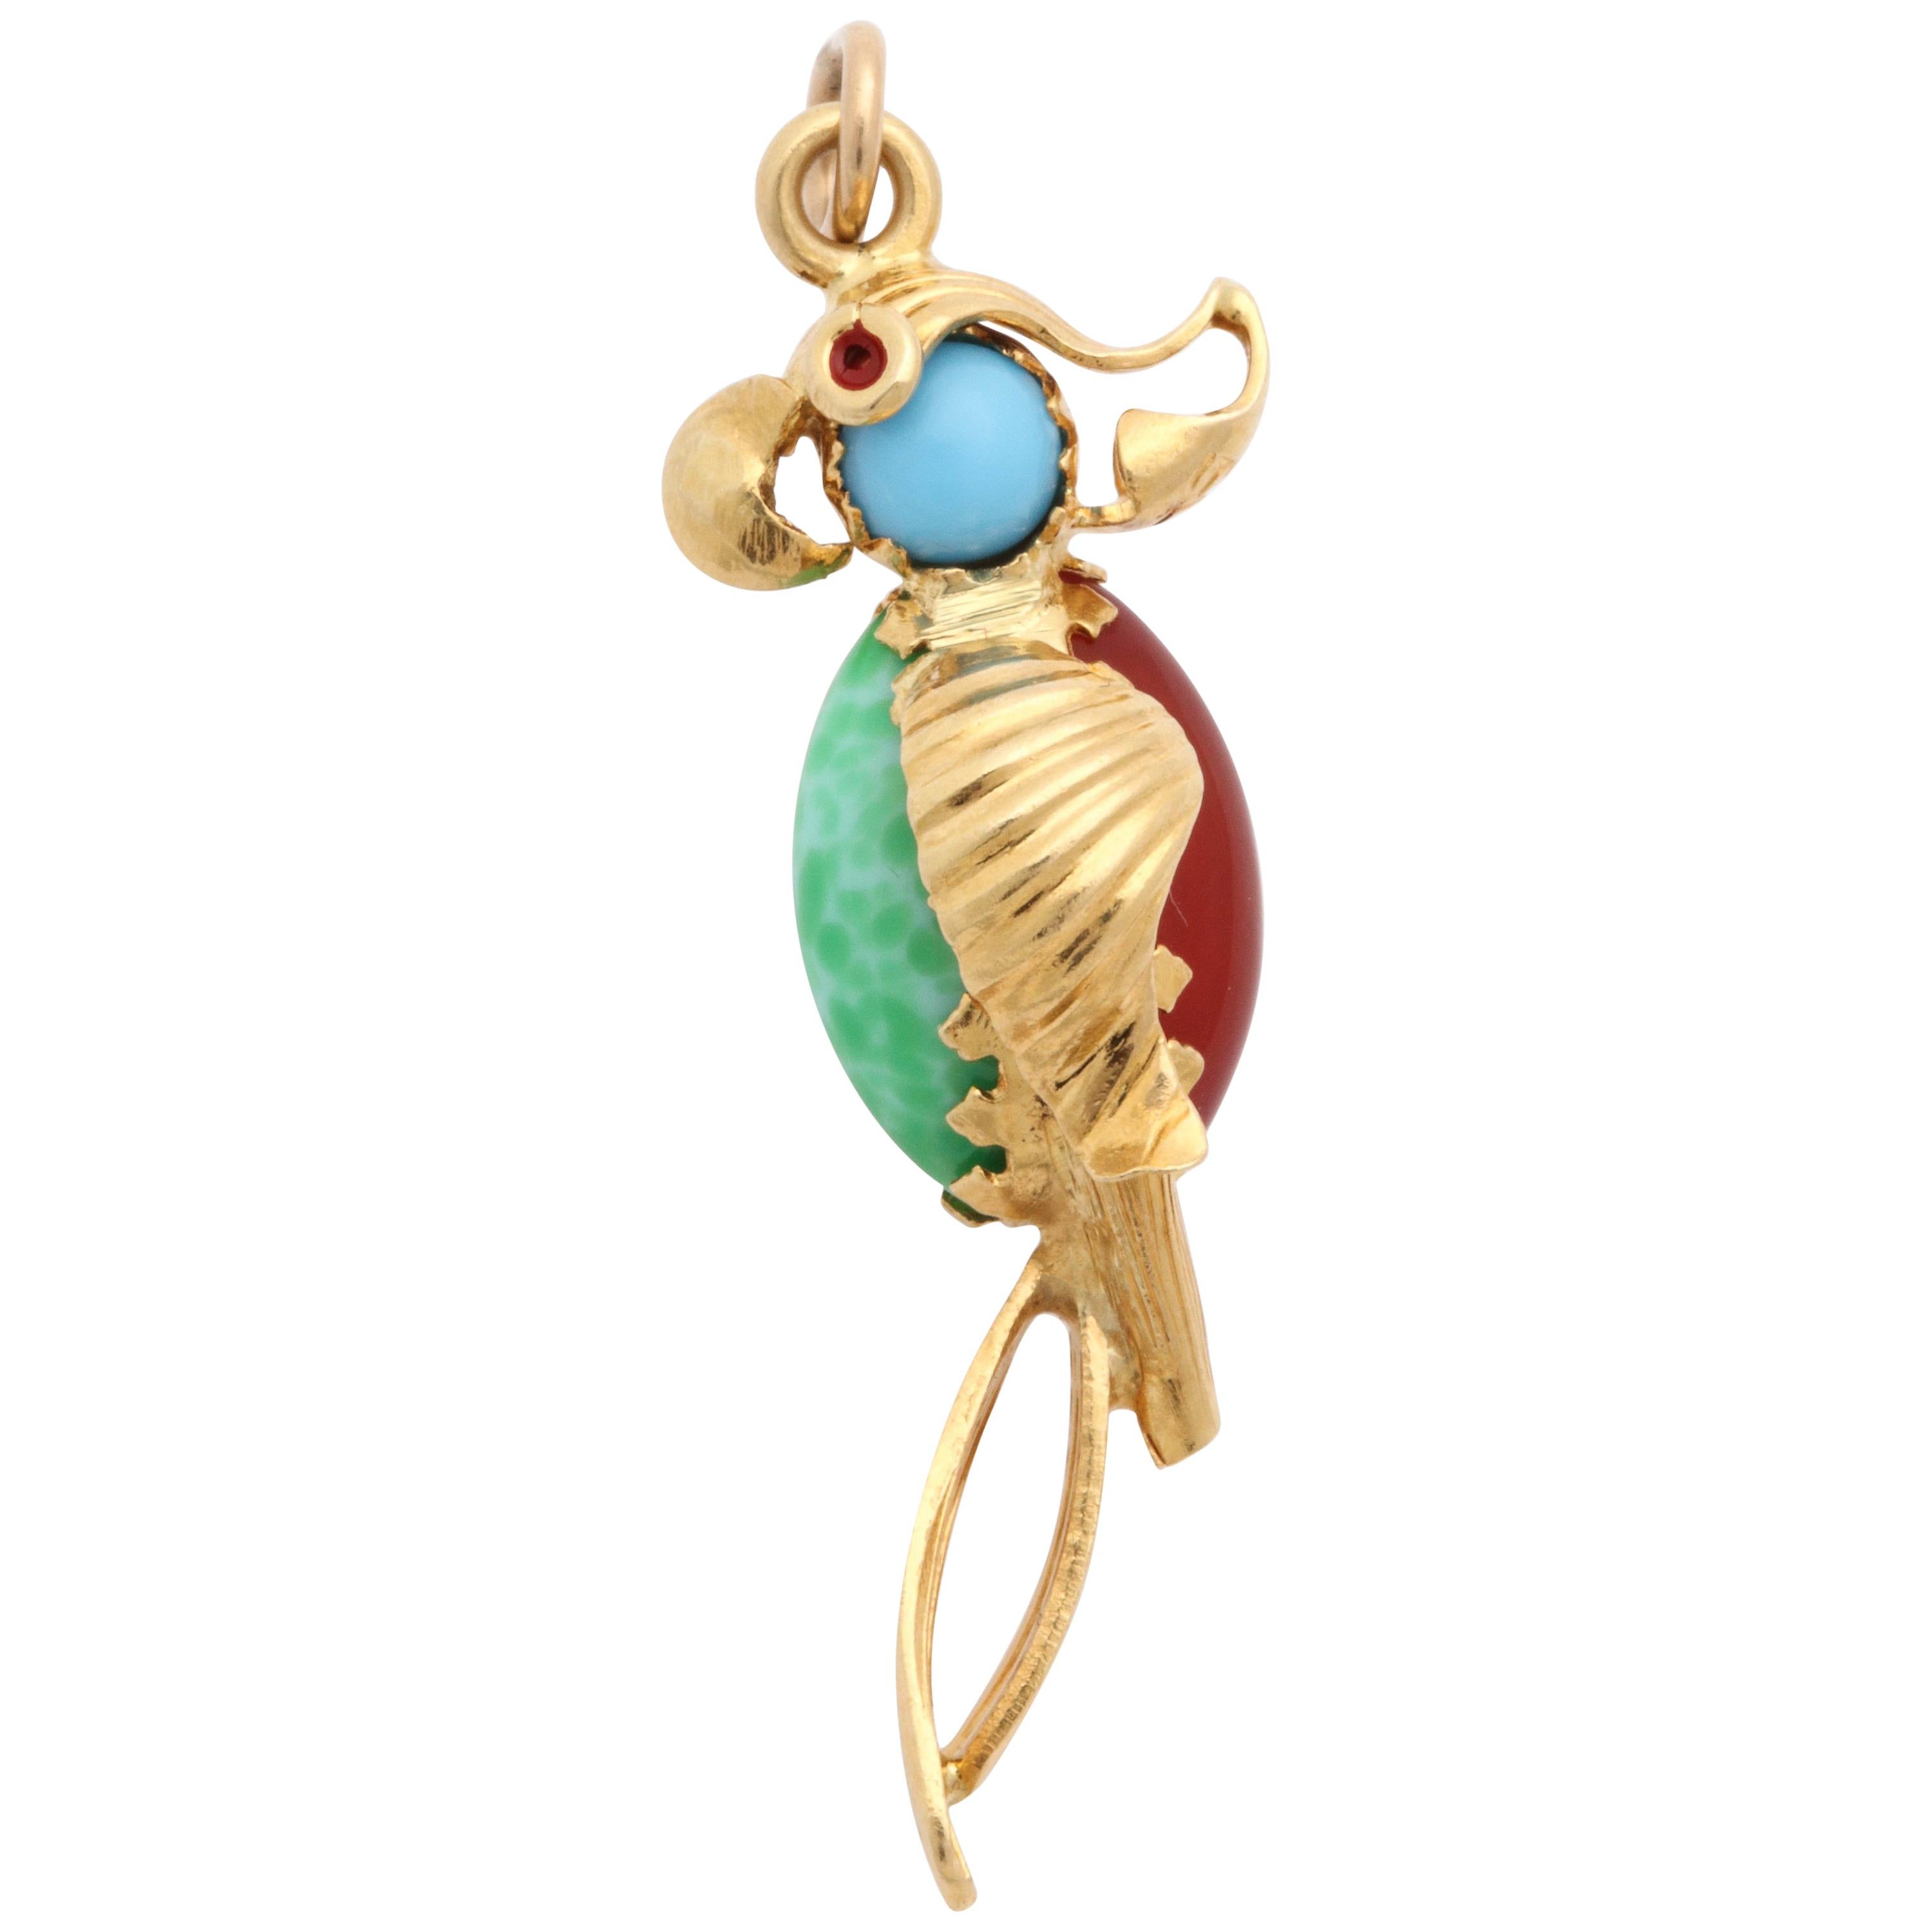 Jade, Turquoise, Carnelian with Red Enamel Eyes Whimsical Gold Parrot Charm